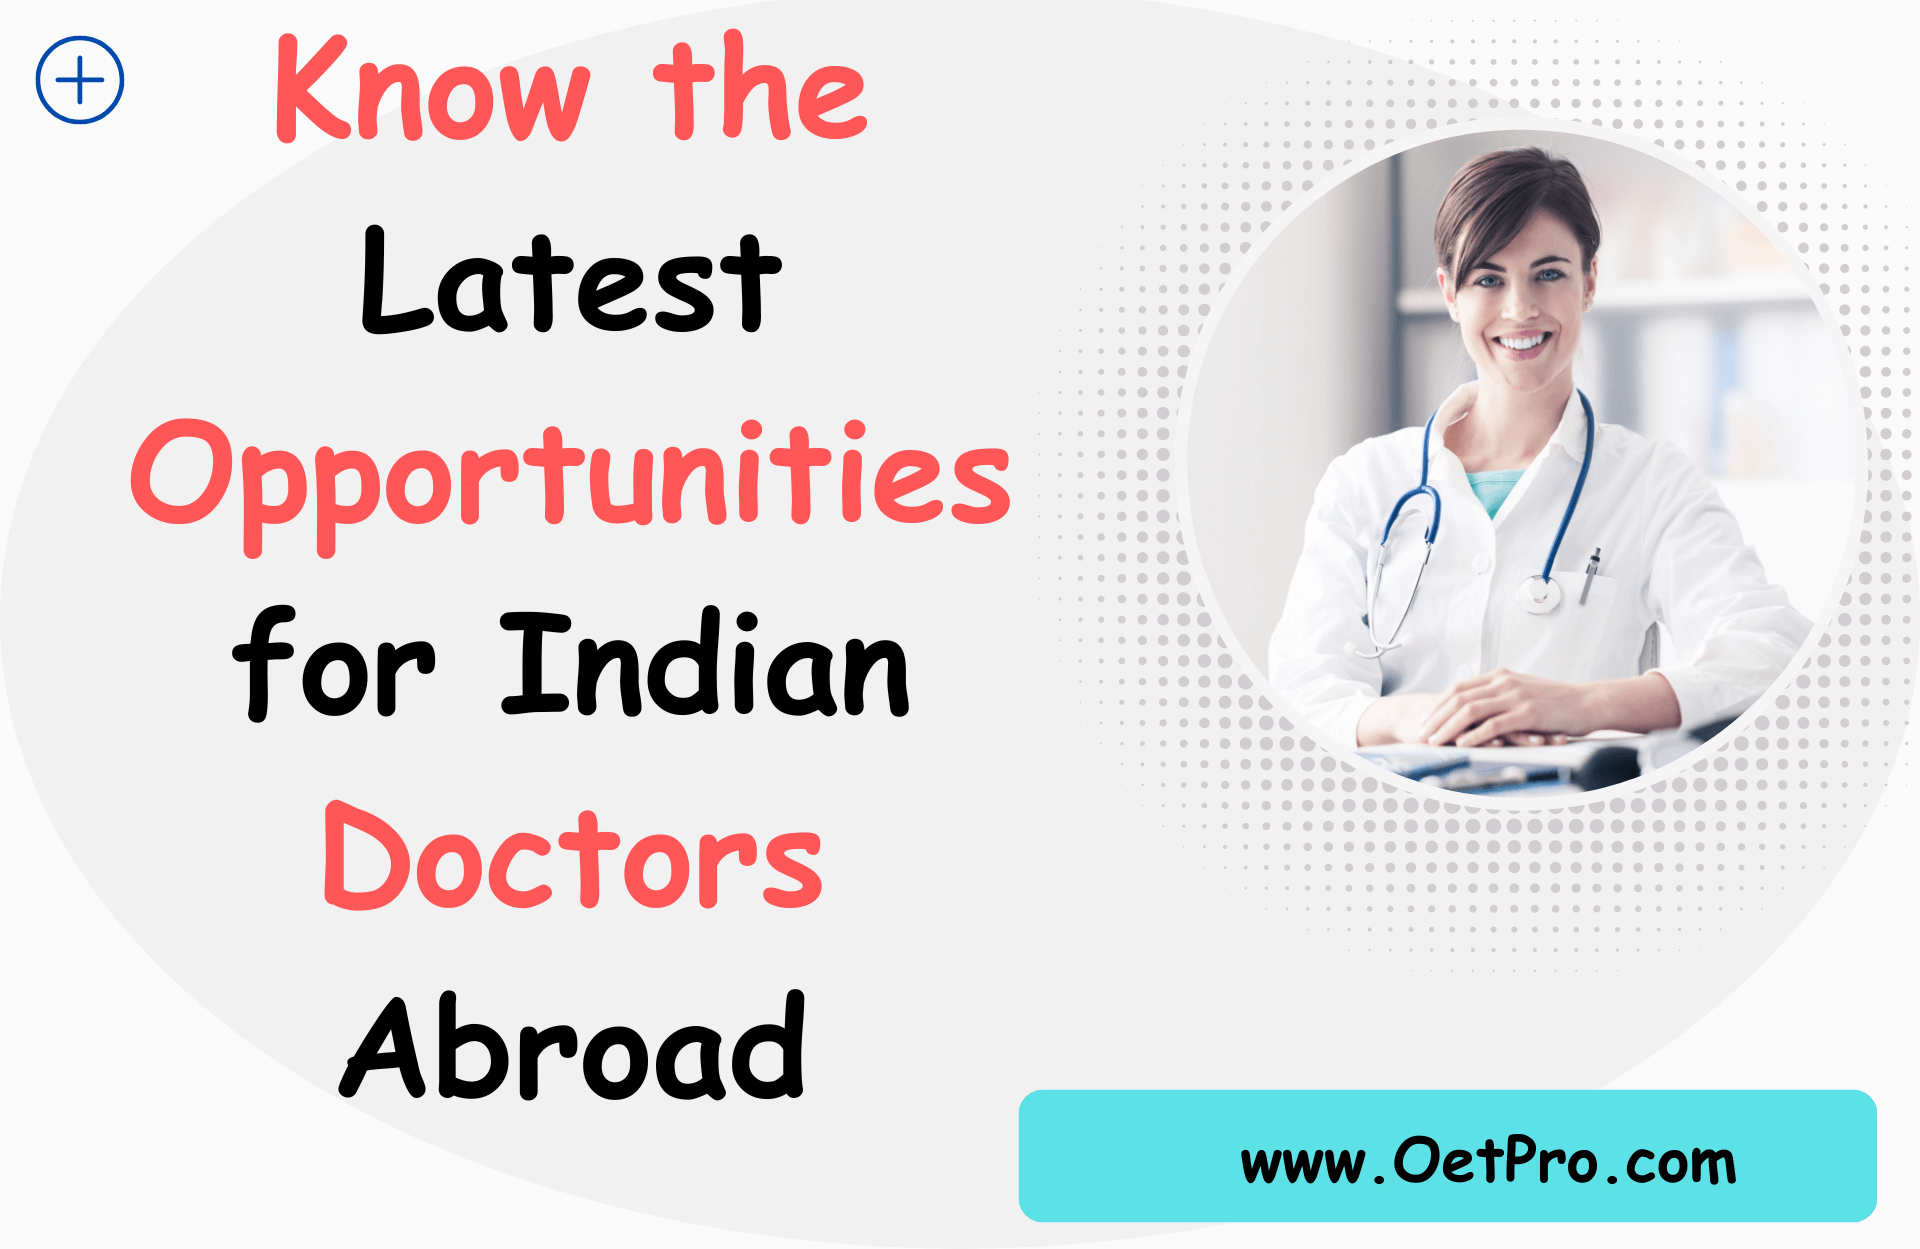 Know the Latest Opportunities for Indian Doctors Abroad